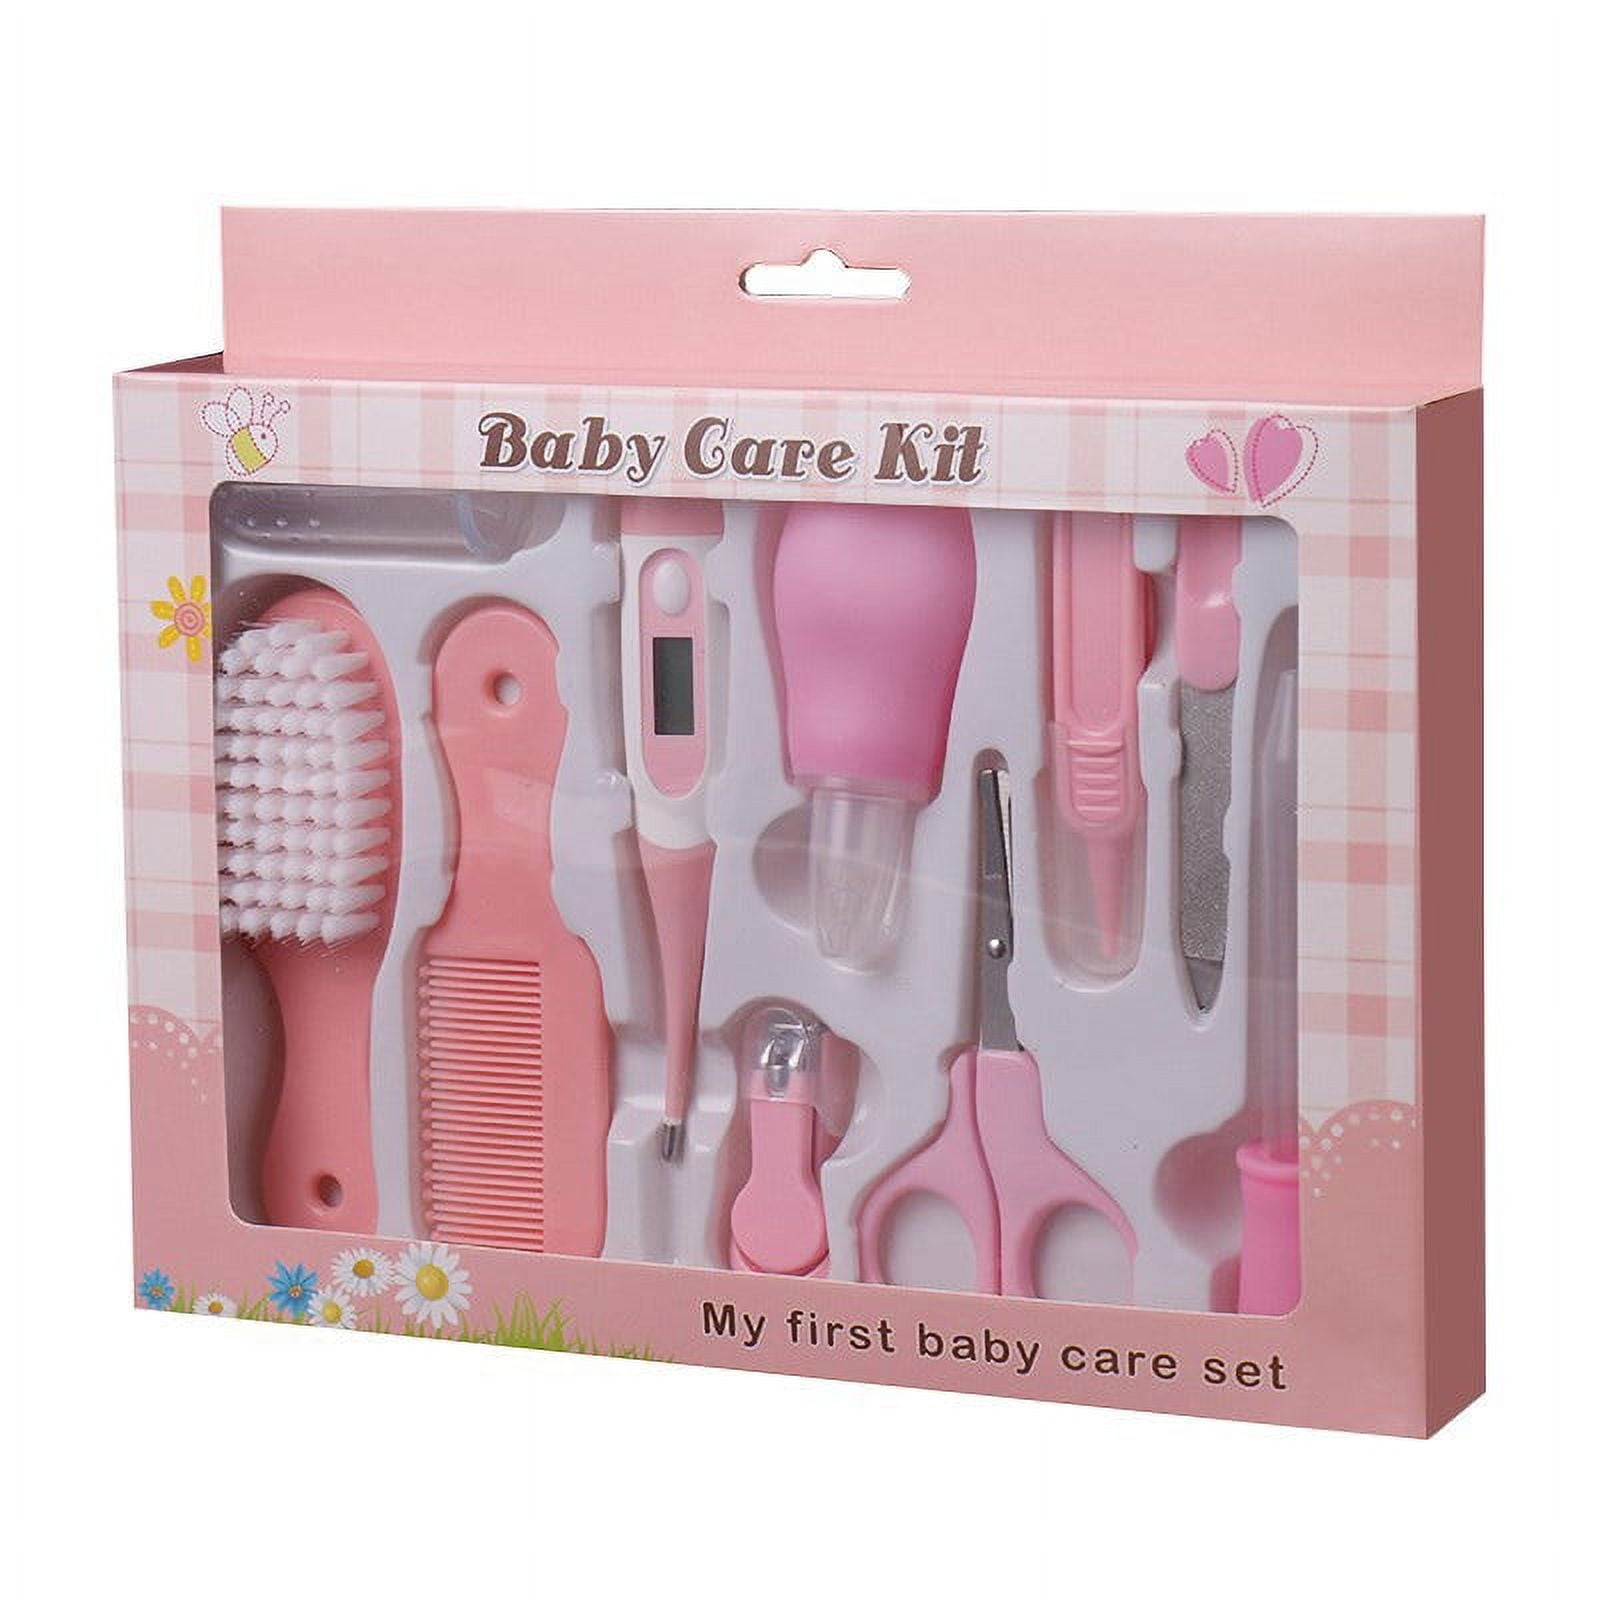 asfly Baby Care Kit Nail Clipper Safety Cutter Toddler Infant Manicure care  - Price in India, Buy asfly Baby Care Kit Nail Clipper Safety Cutter  Toddler Infant Manicure care Online In India,